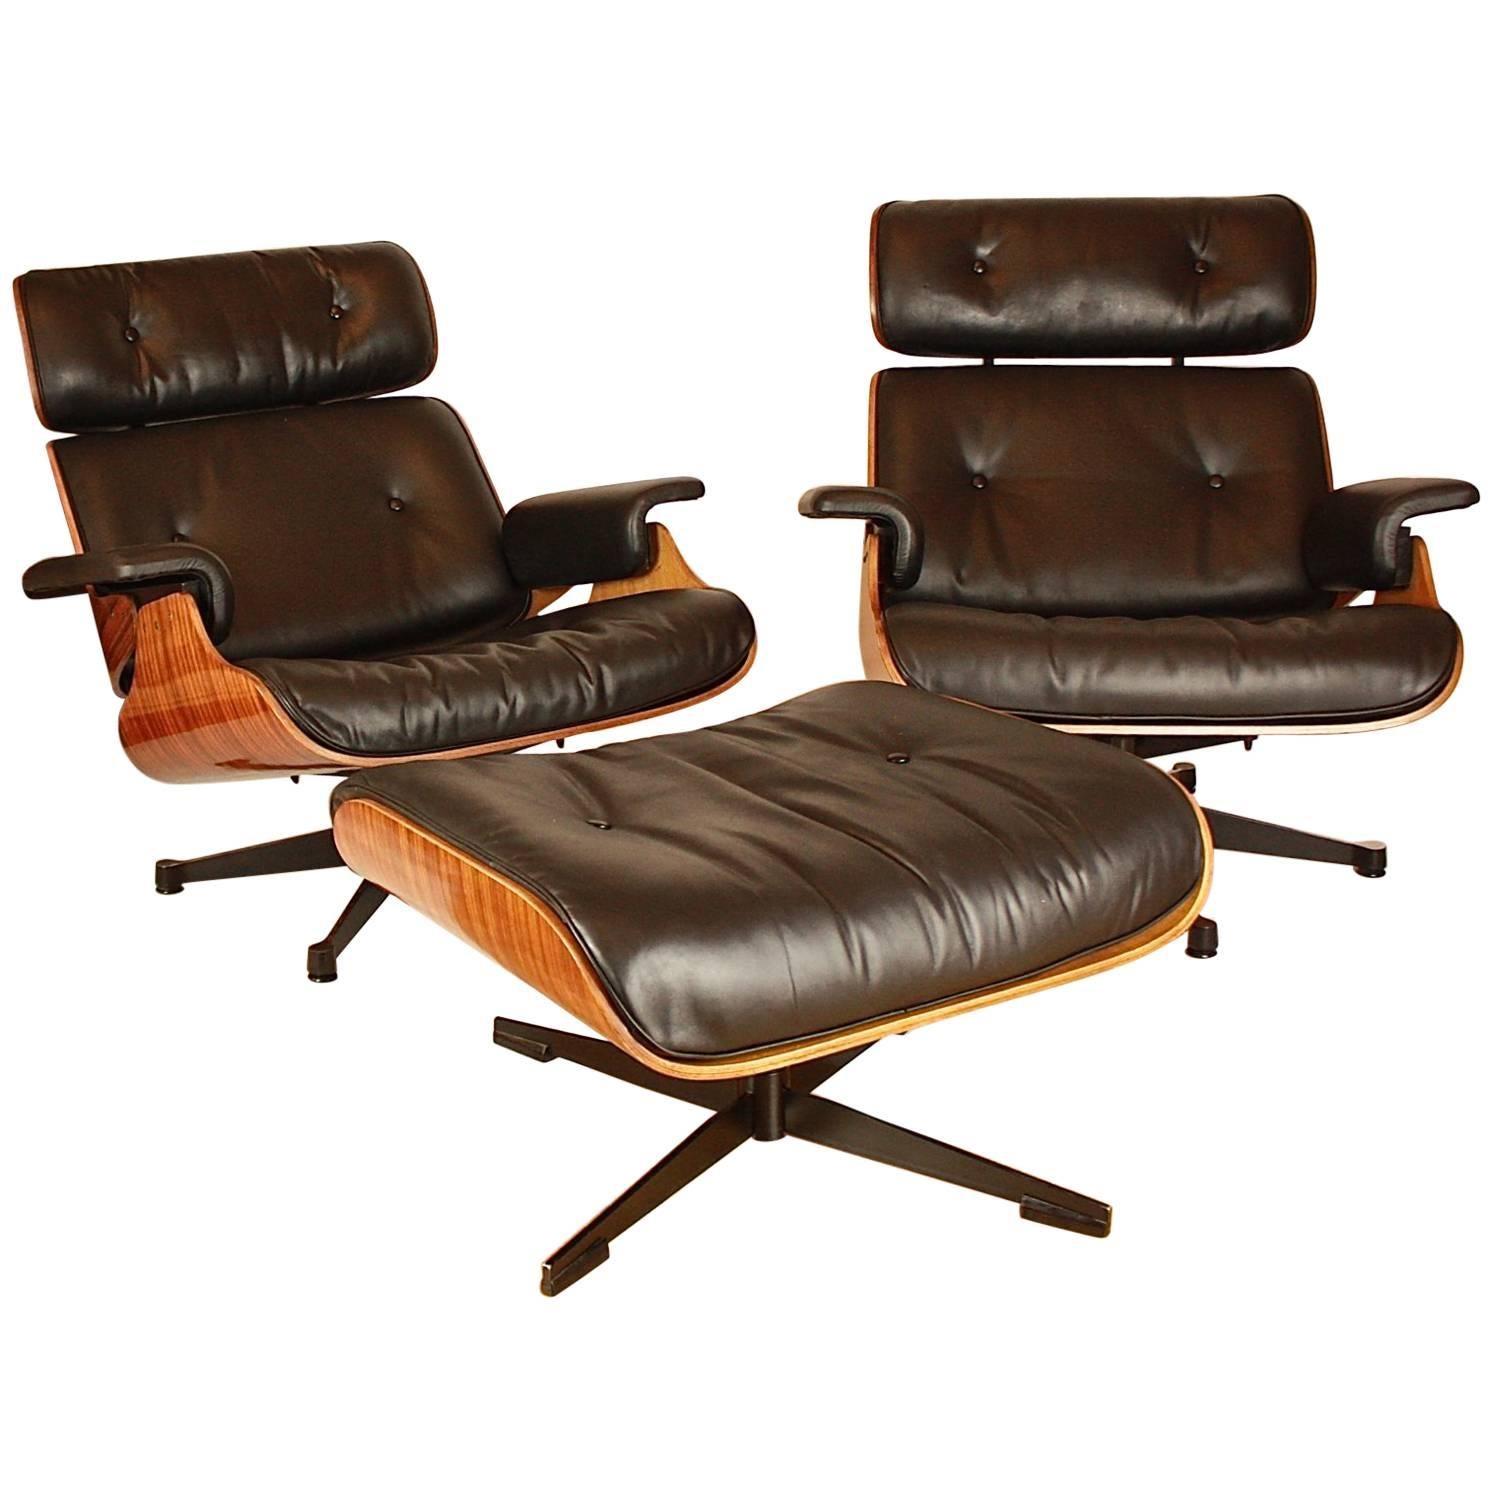 Pair of Ray and Charles Eames Style Lounge Chair with One Ottoman